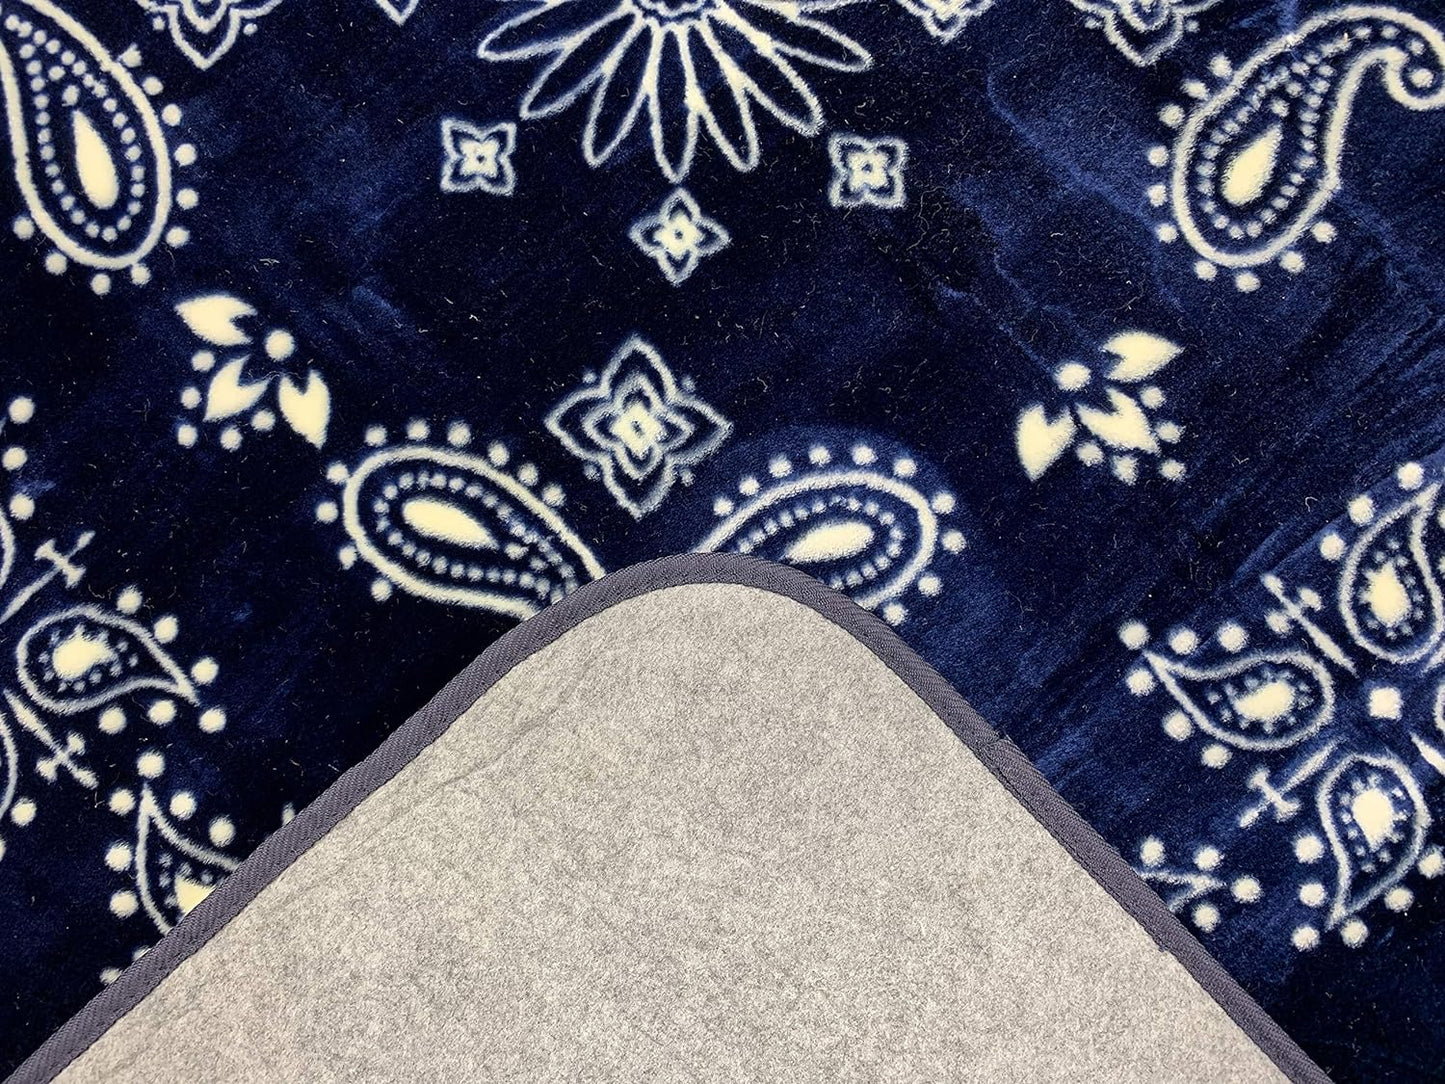 Blanket Paisley Oriental Design Area Rug Rugs Fabric Backing (Navy Blue, 6 x 6 (6'1' x 6'1")